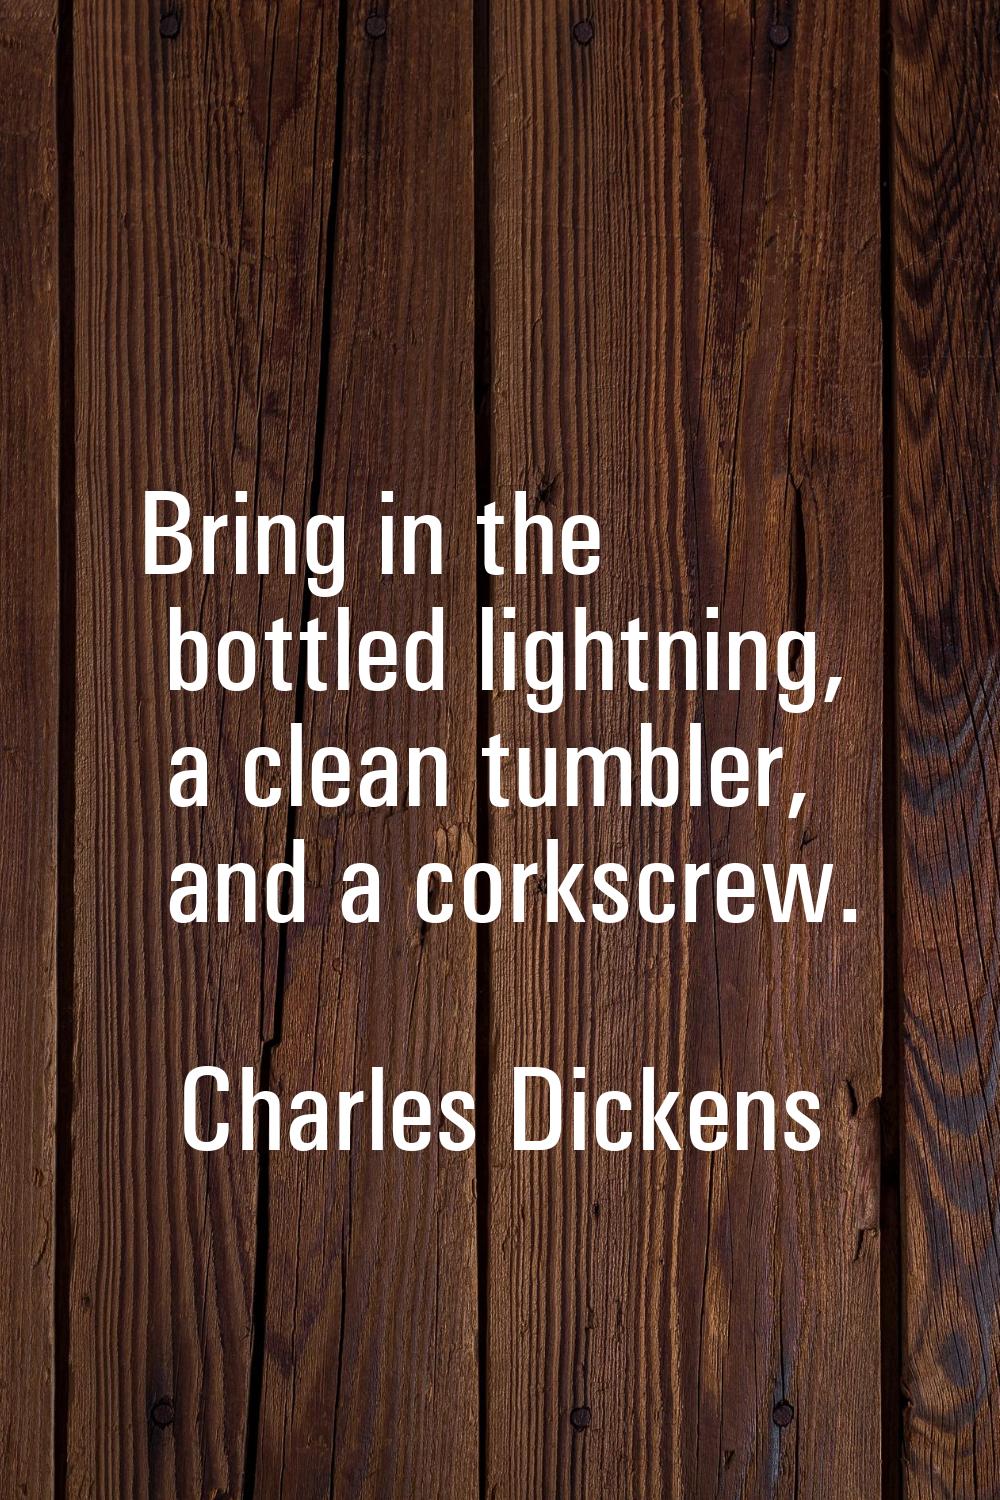 Bring in the bottled lightning, a clean tumbler, and a corkscrew.